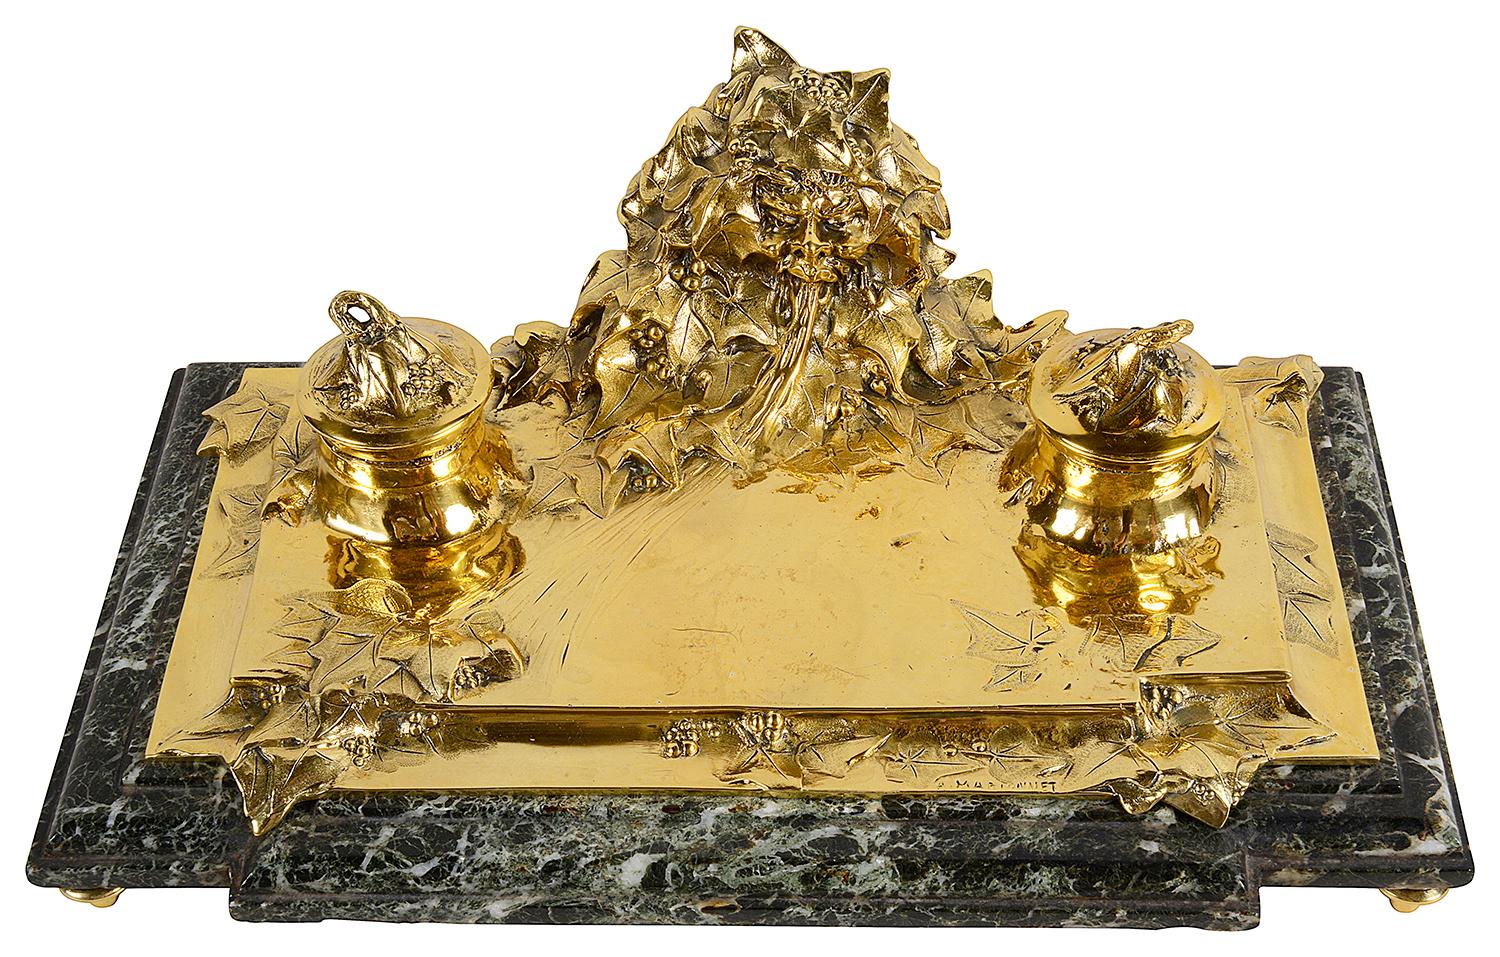 A very comprehensive five piece, late 19th century gilded bronze Art Nouveau desk set by ;
Albert Marionnet (1852-1910).
Each piece have these mythical busts coming out of the ground with Ivy wrapped around him,
signed A. Marionnet.
Mounted on